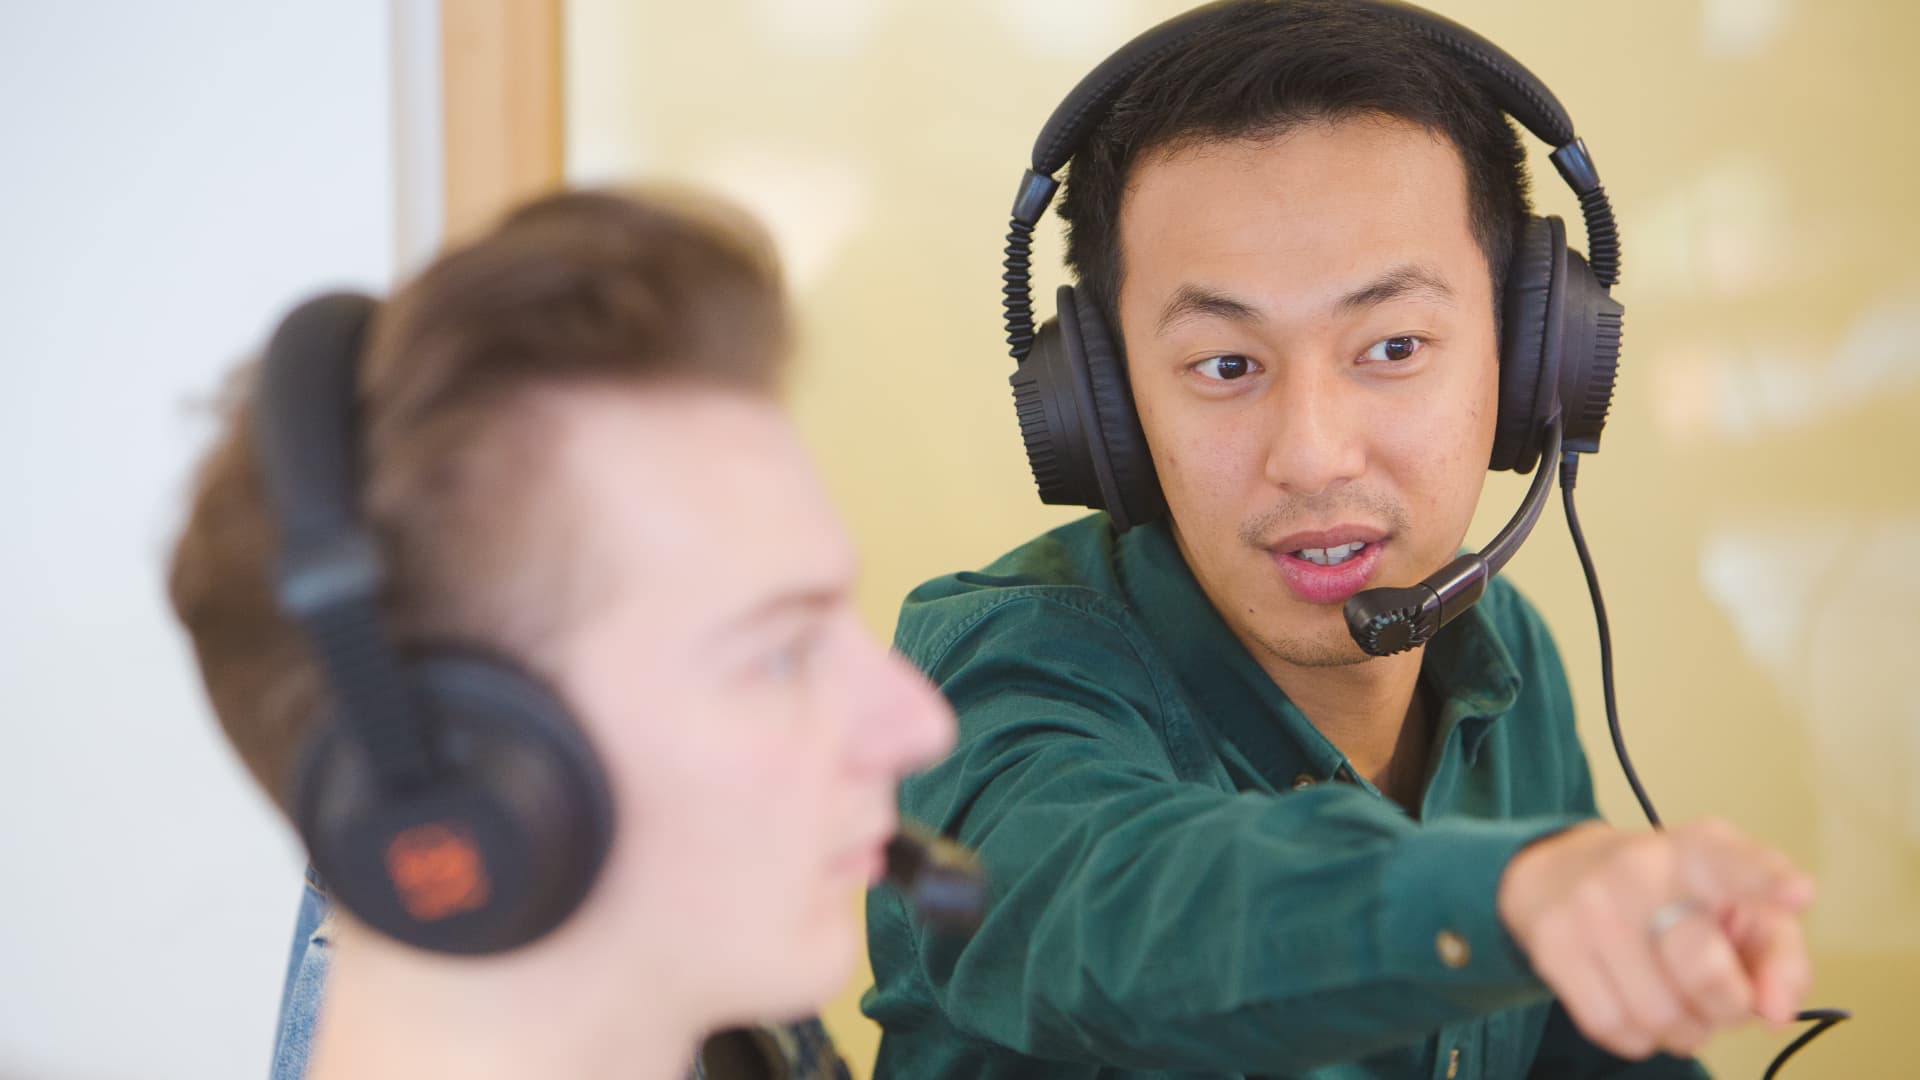 Two people wearing headsets are in a classroom. One is pointing at a screen to show the other person.